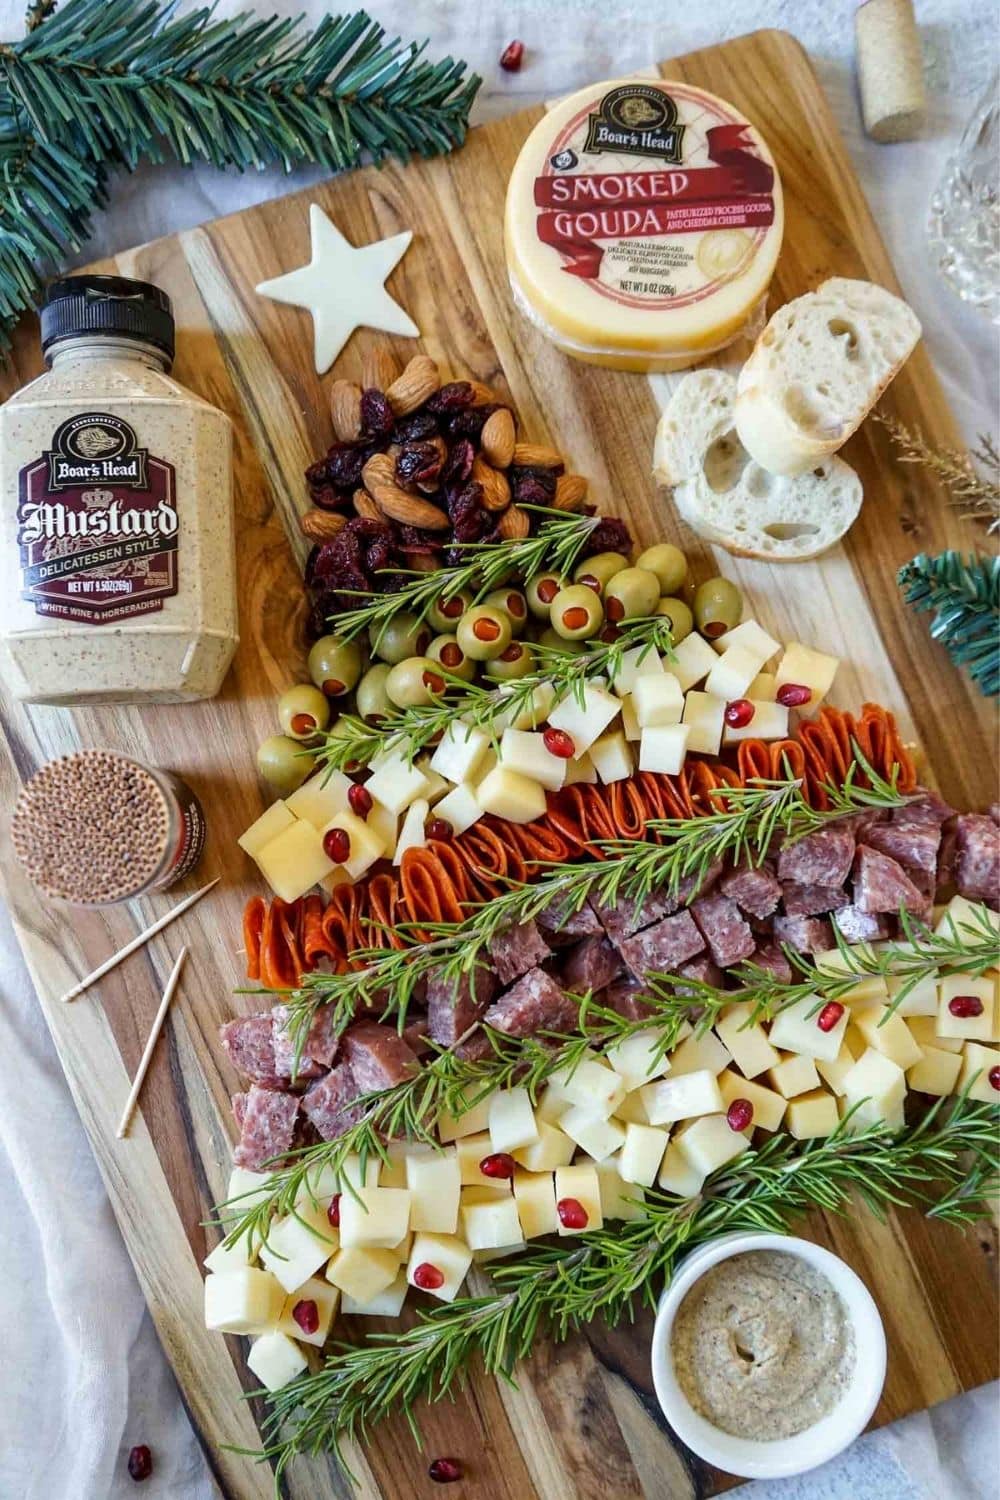 Christmas tree charcuterie board from a sponsored post that was part of my food blog earning in 2021.